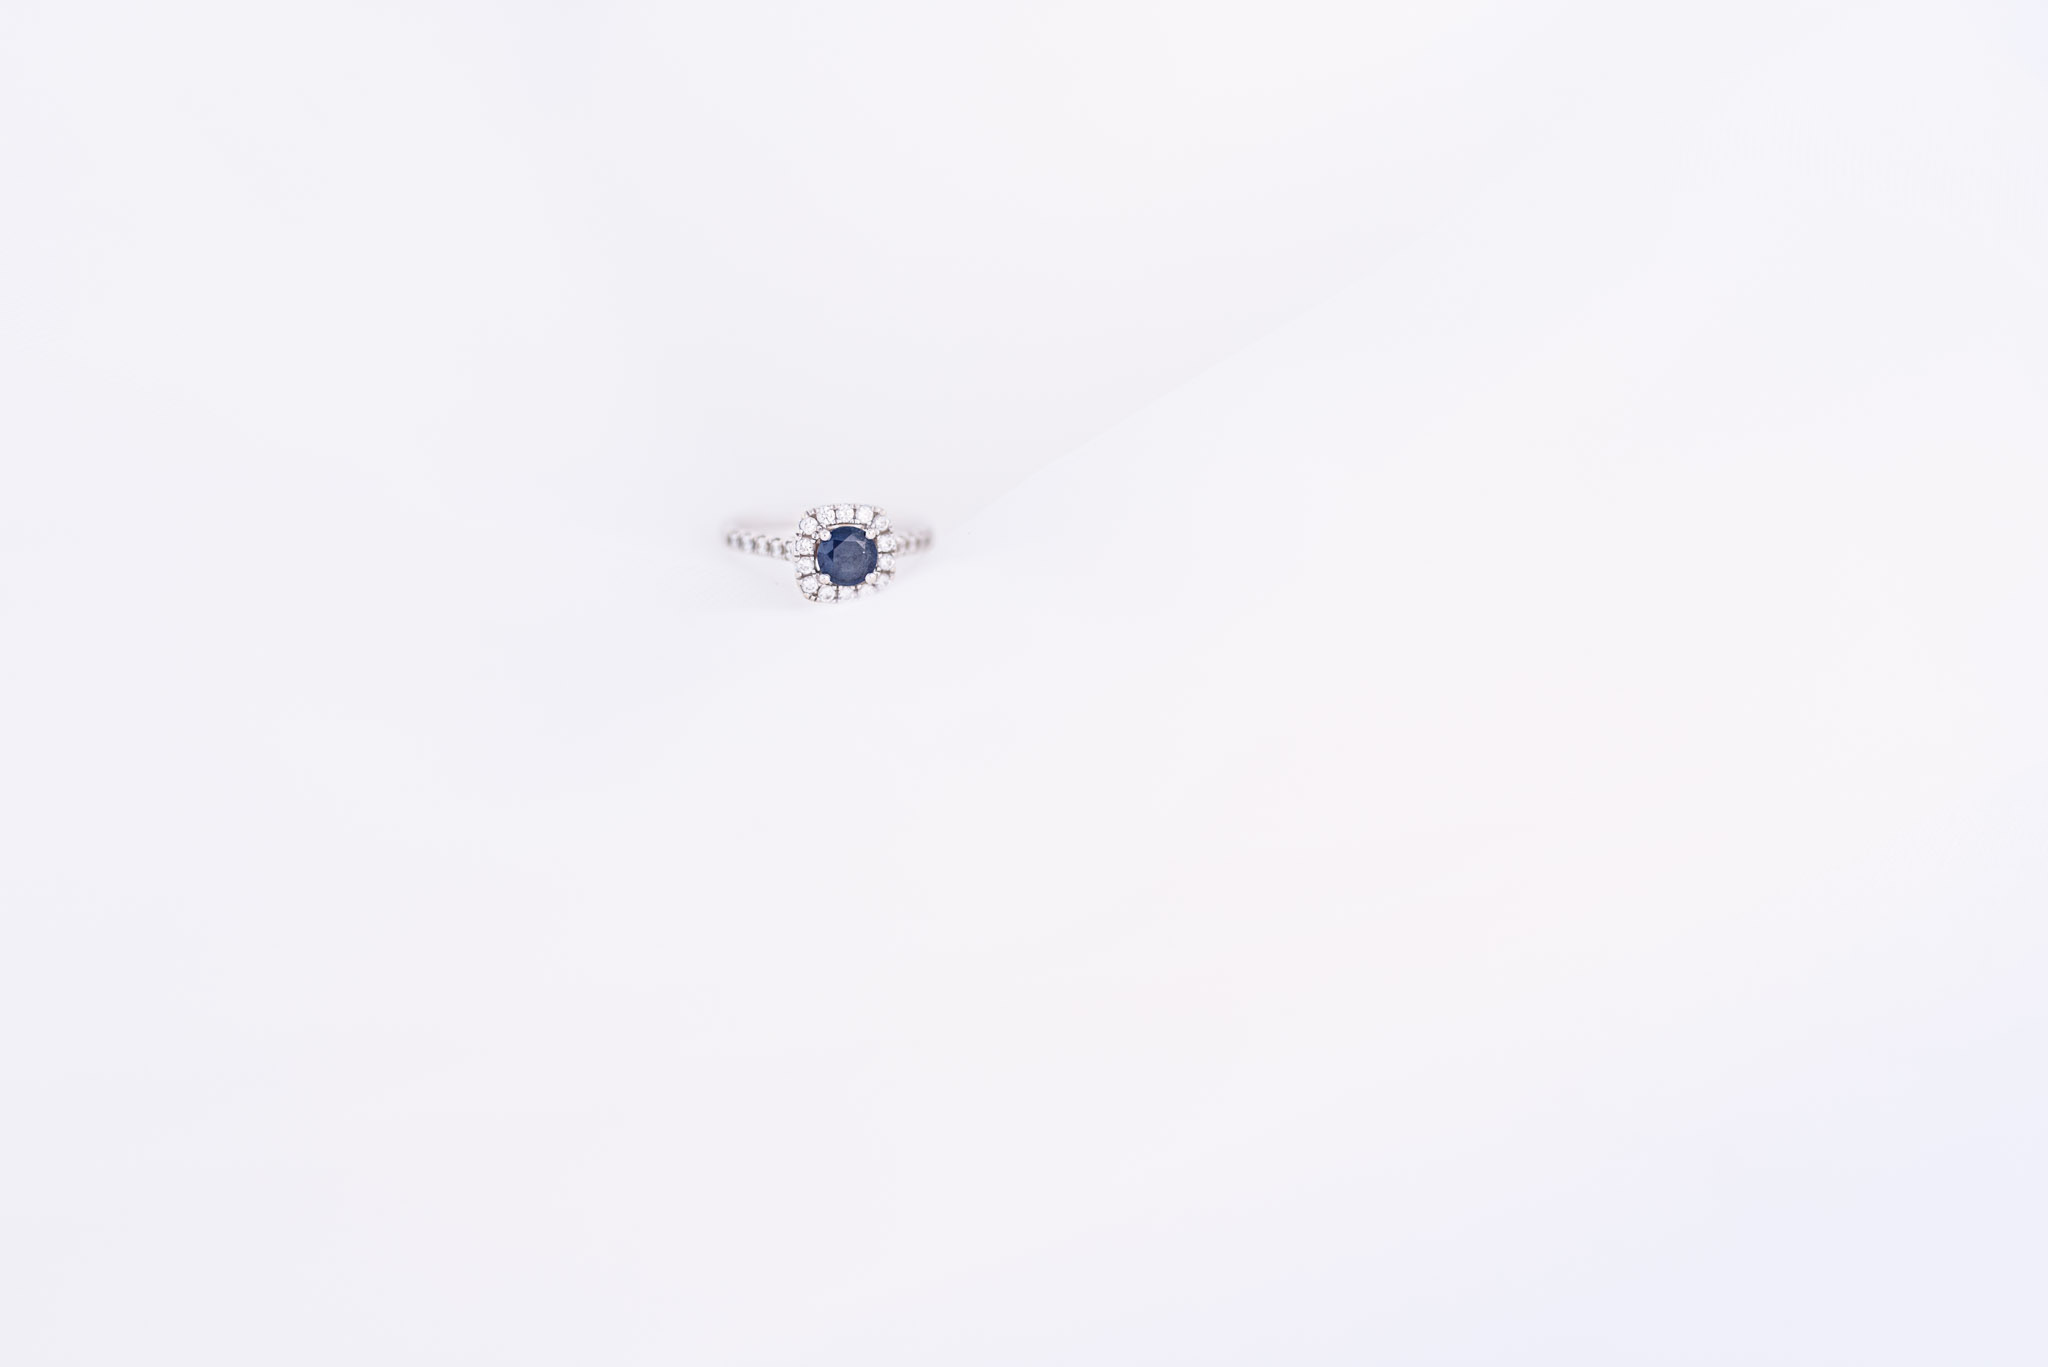 Blue sapphire ring sitting on white cloth.